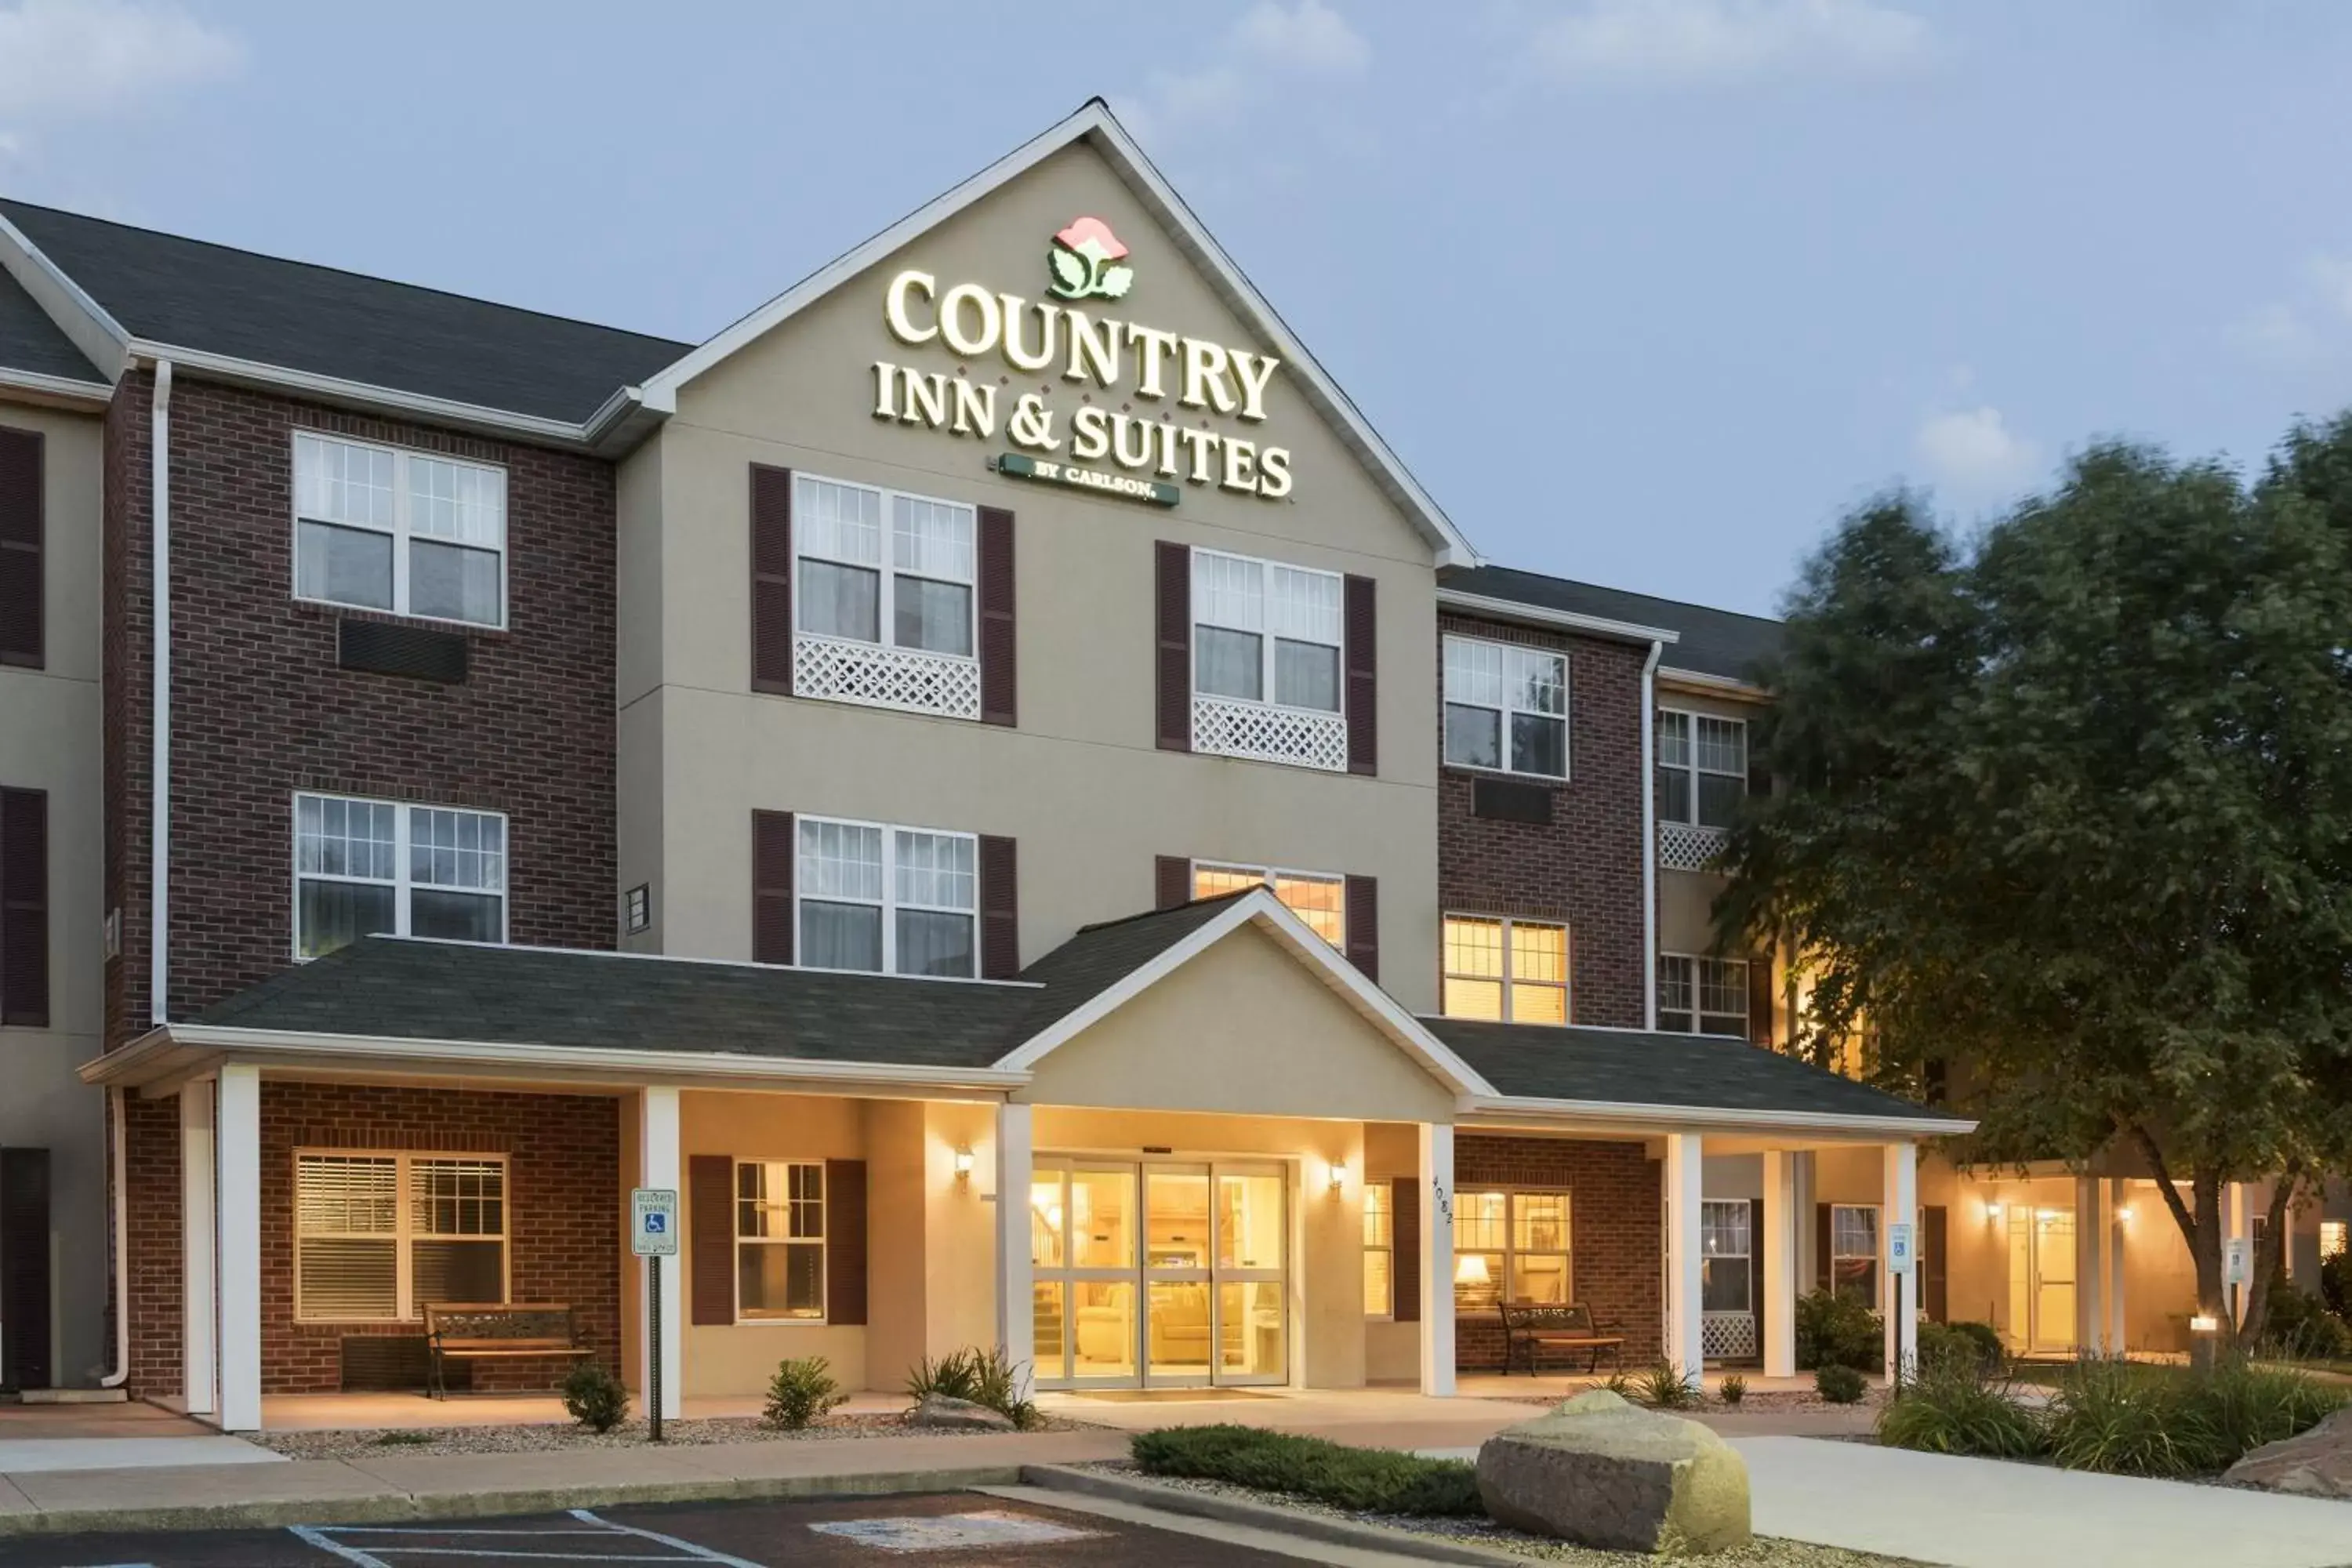 Property Building in Country Inn & Suites by Radisson, Mason City, IA